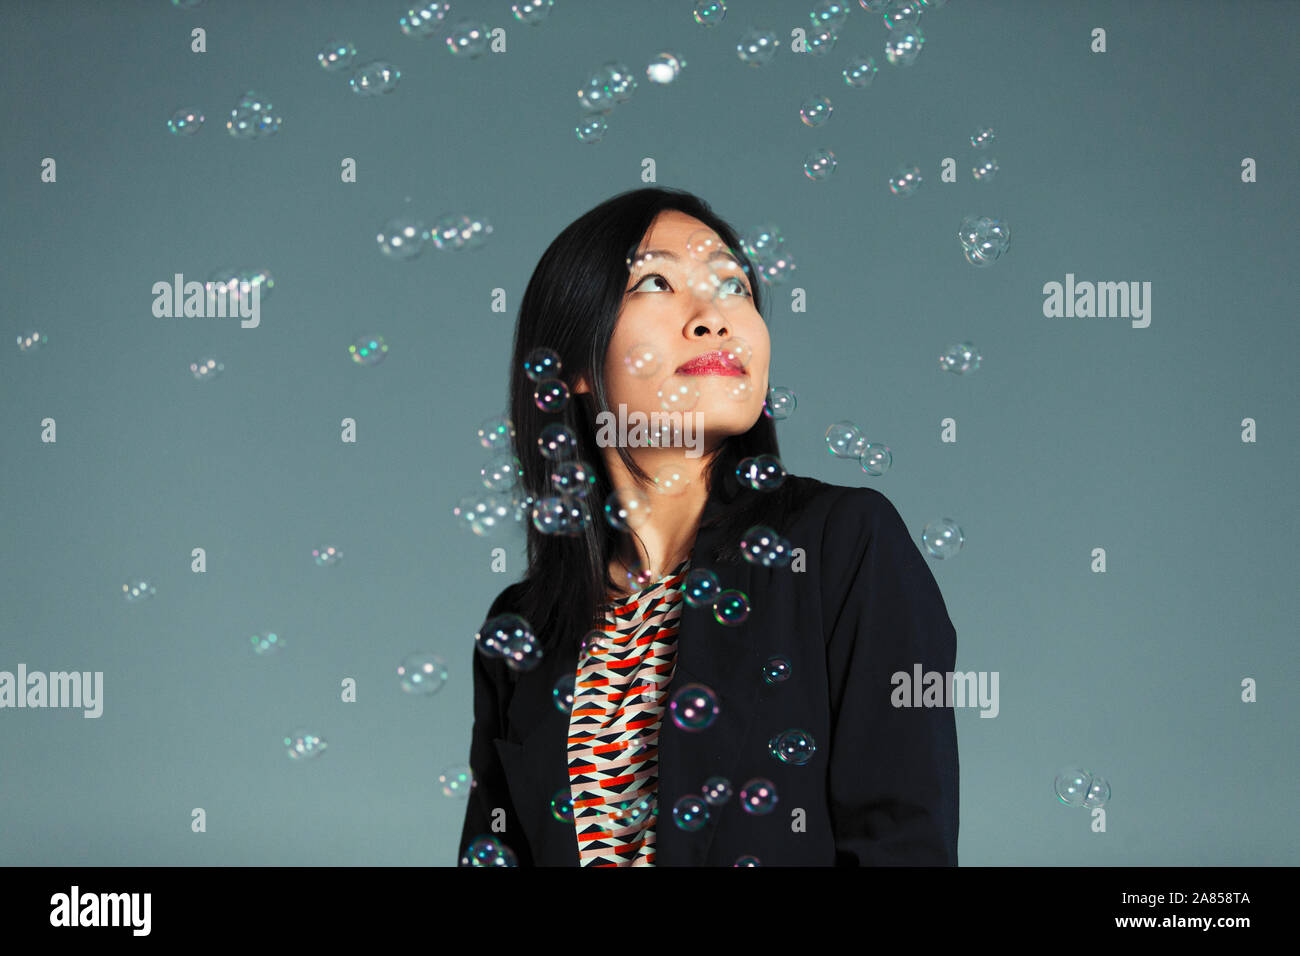 Bubbles falling around curious woman Stock Photo